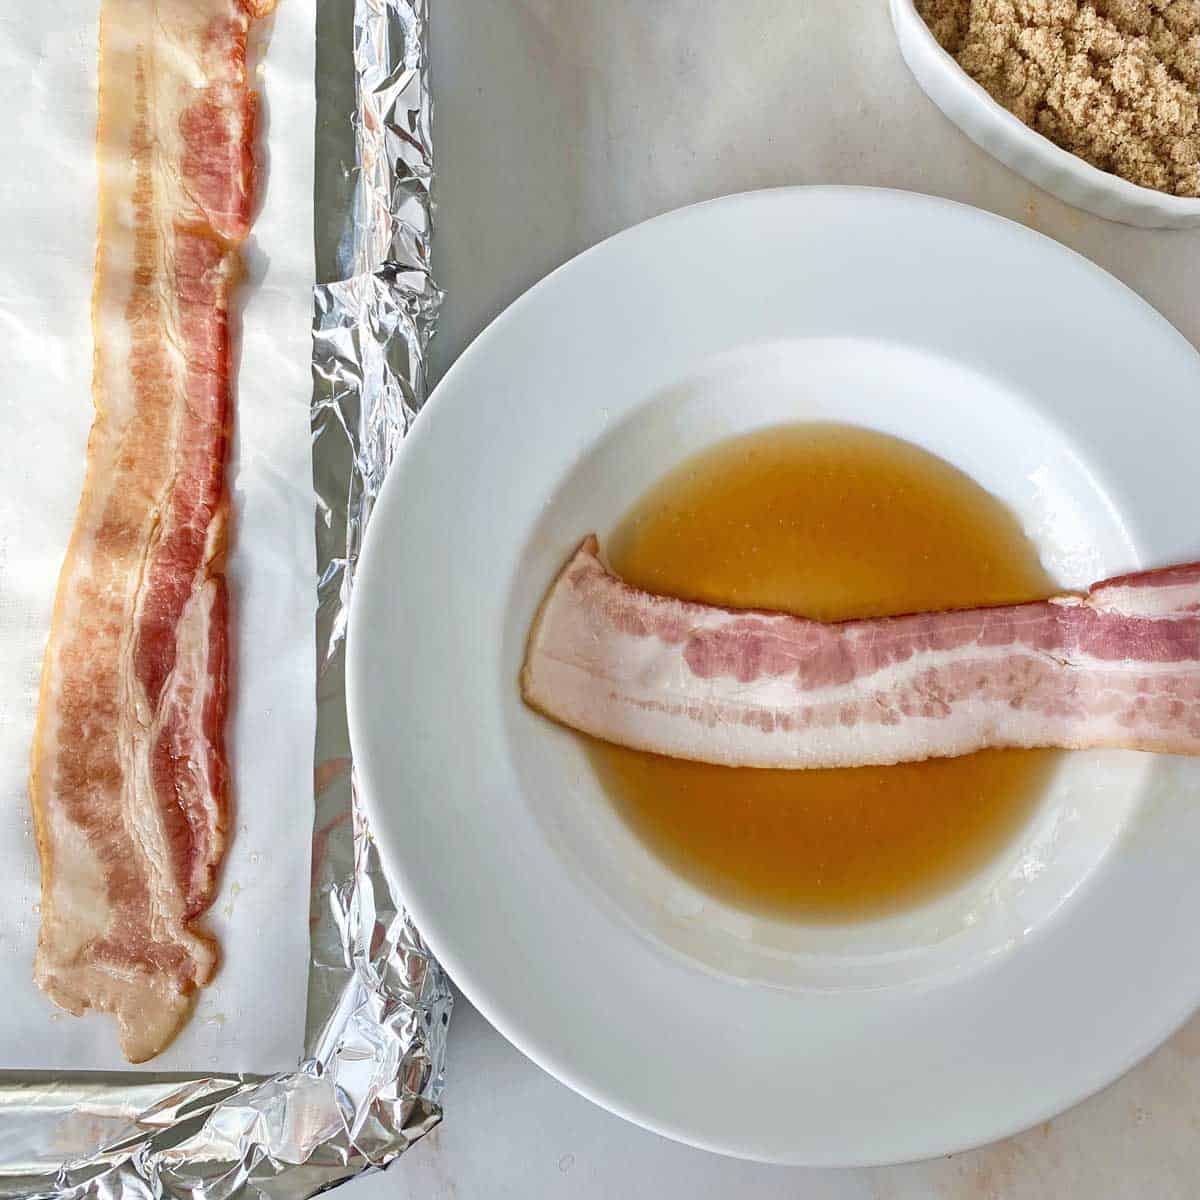 Dipping a bacon strip in maple syrup in a white bowl.